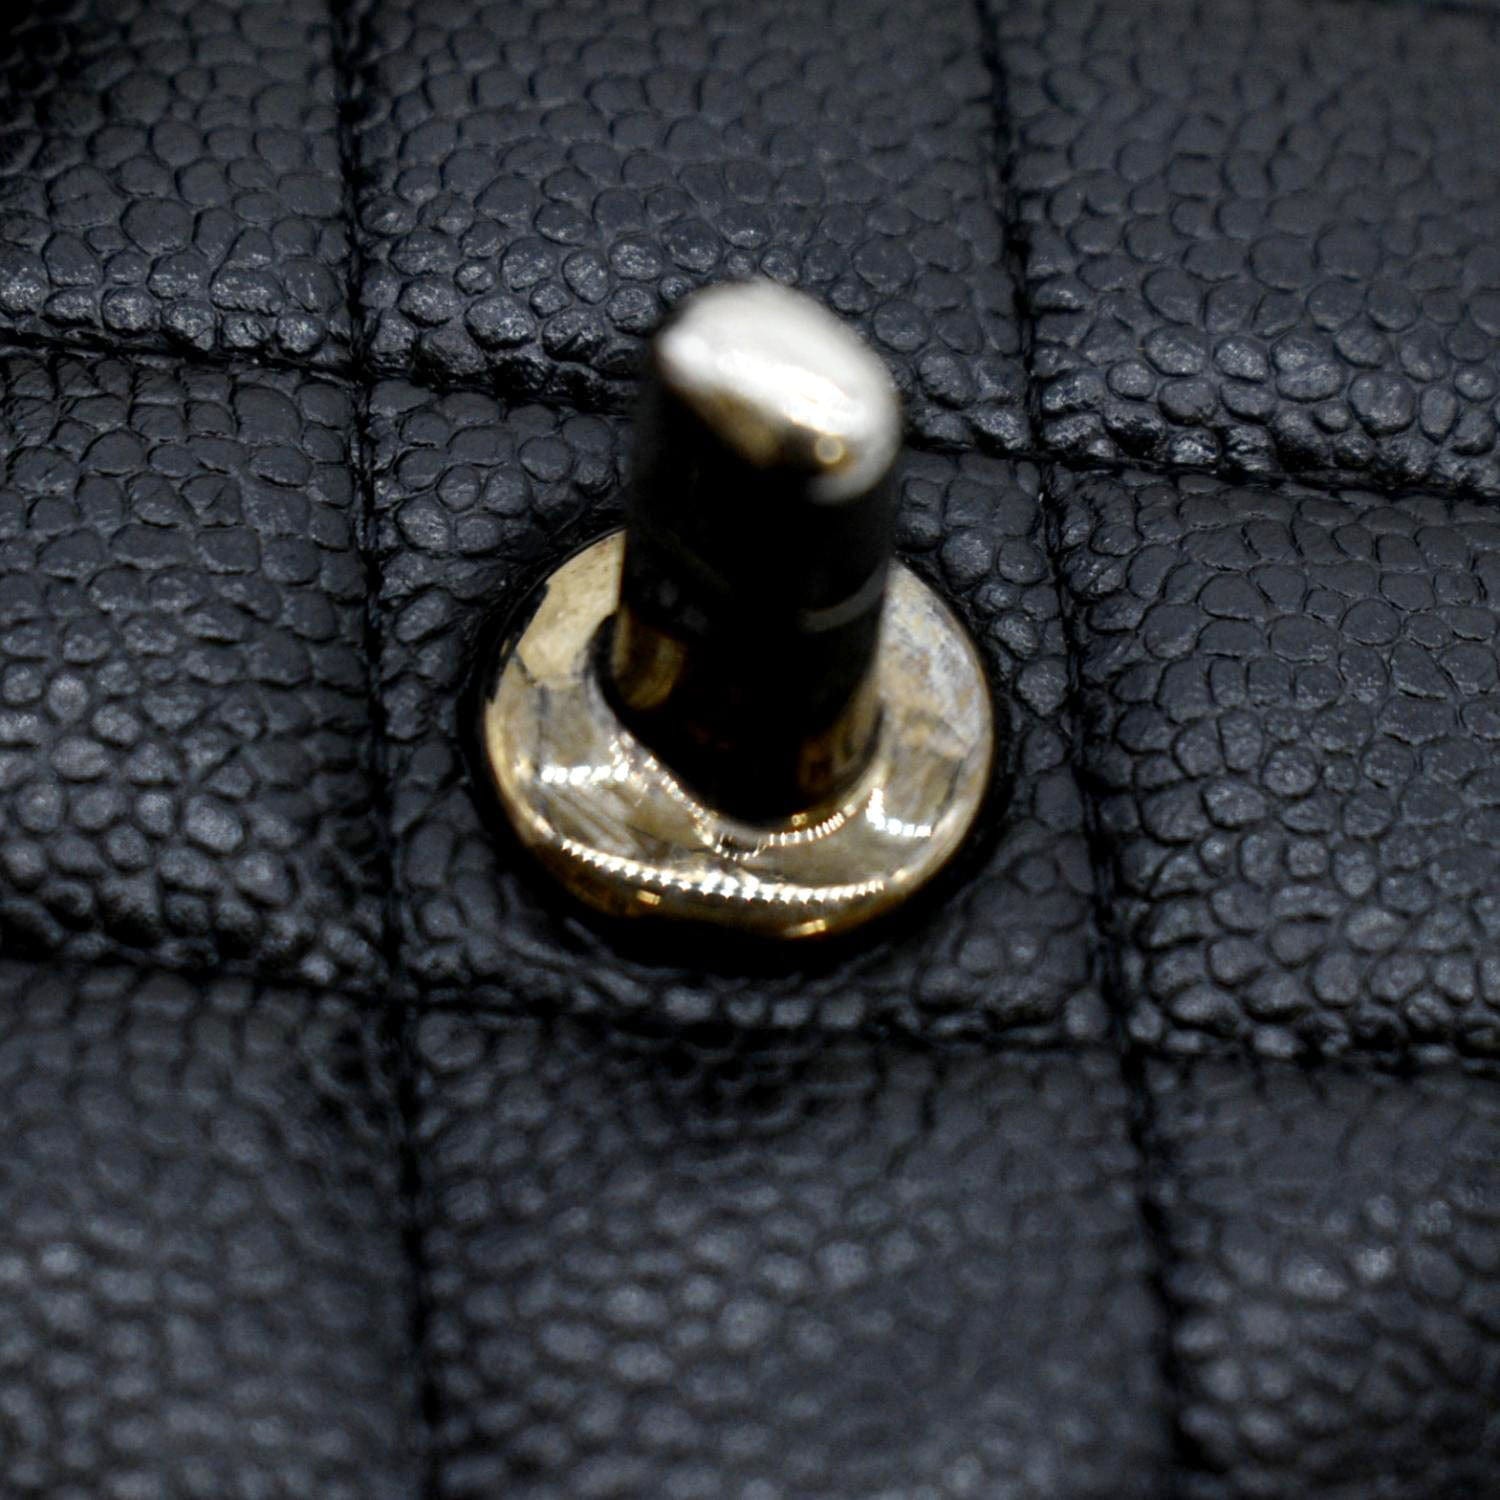 CHANEL Classic Medium Double Flap Quilted Caviar Leather Shoulder Bag